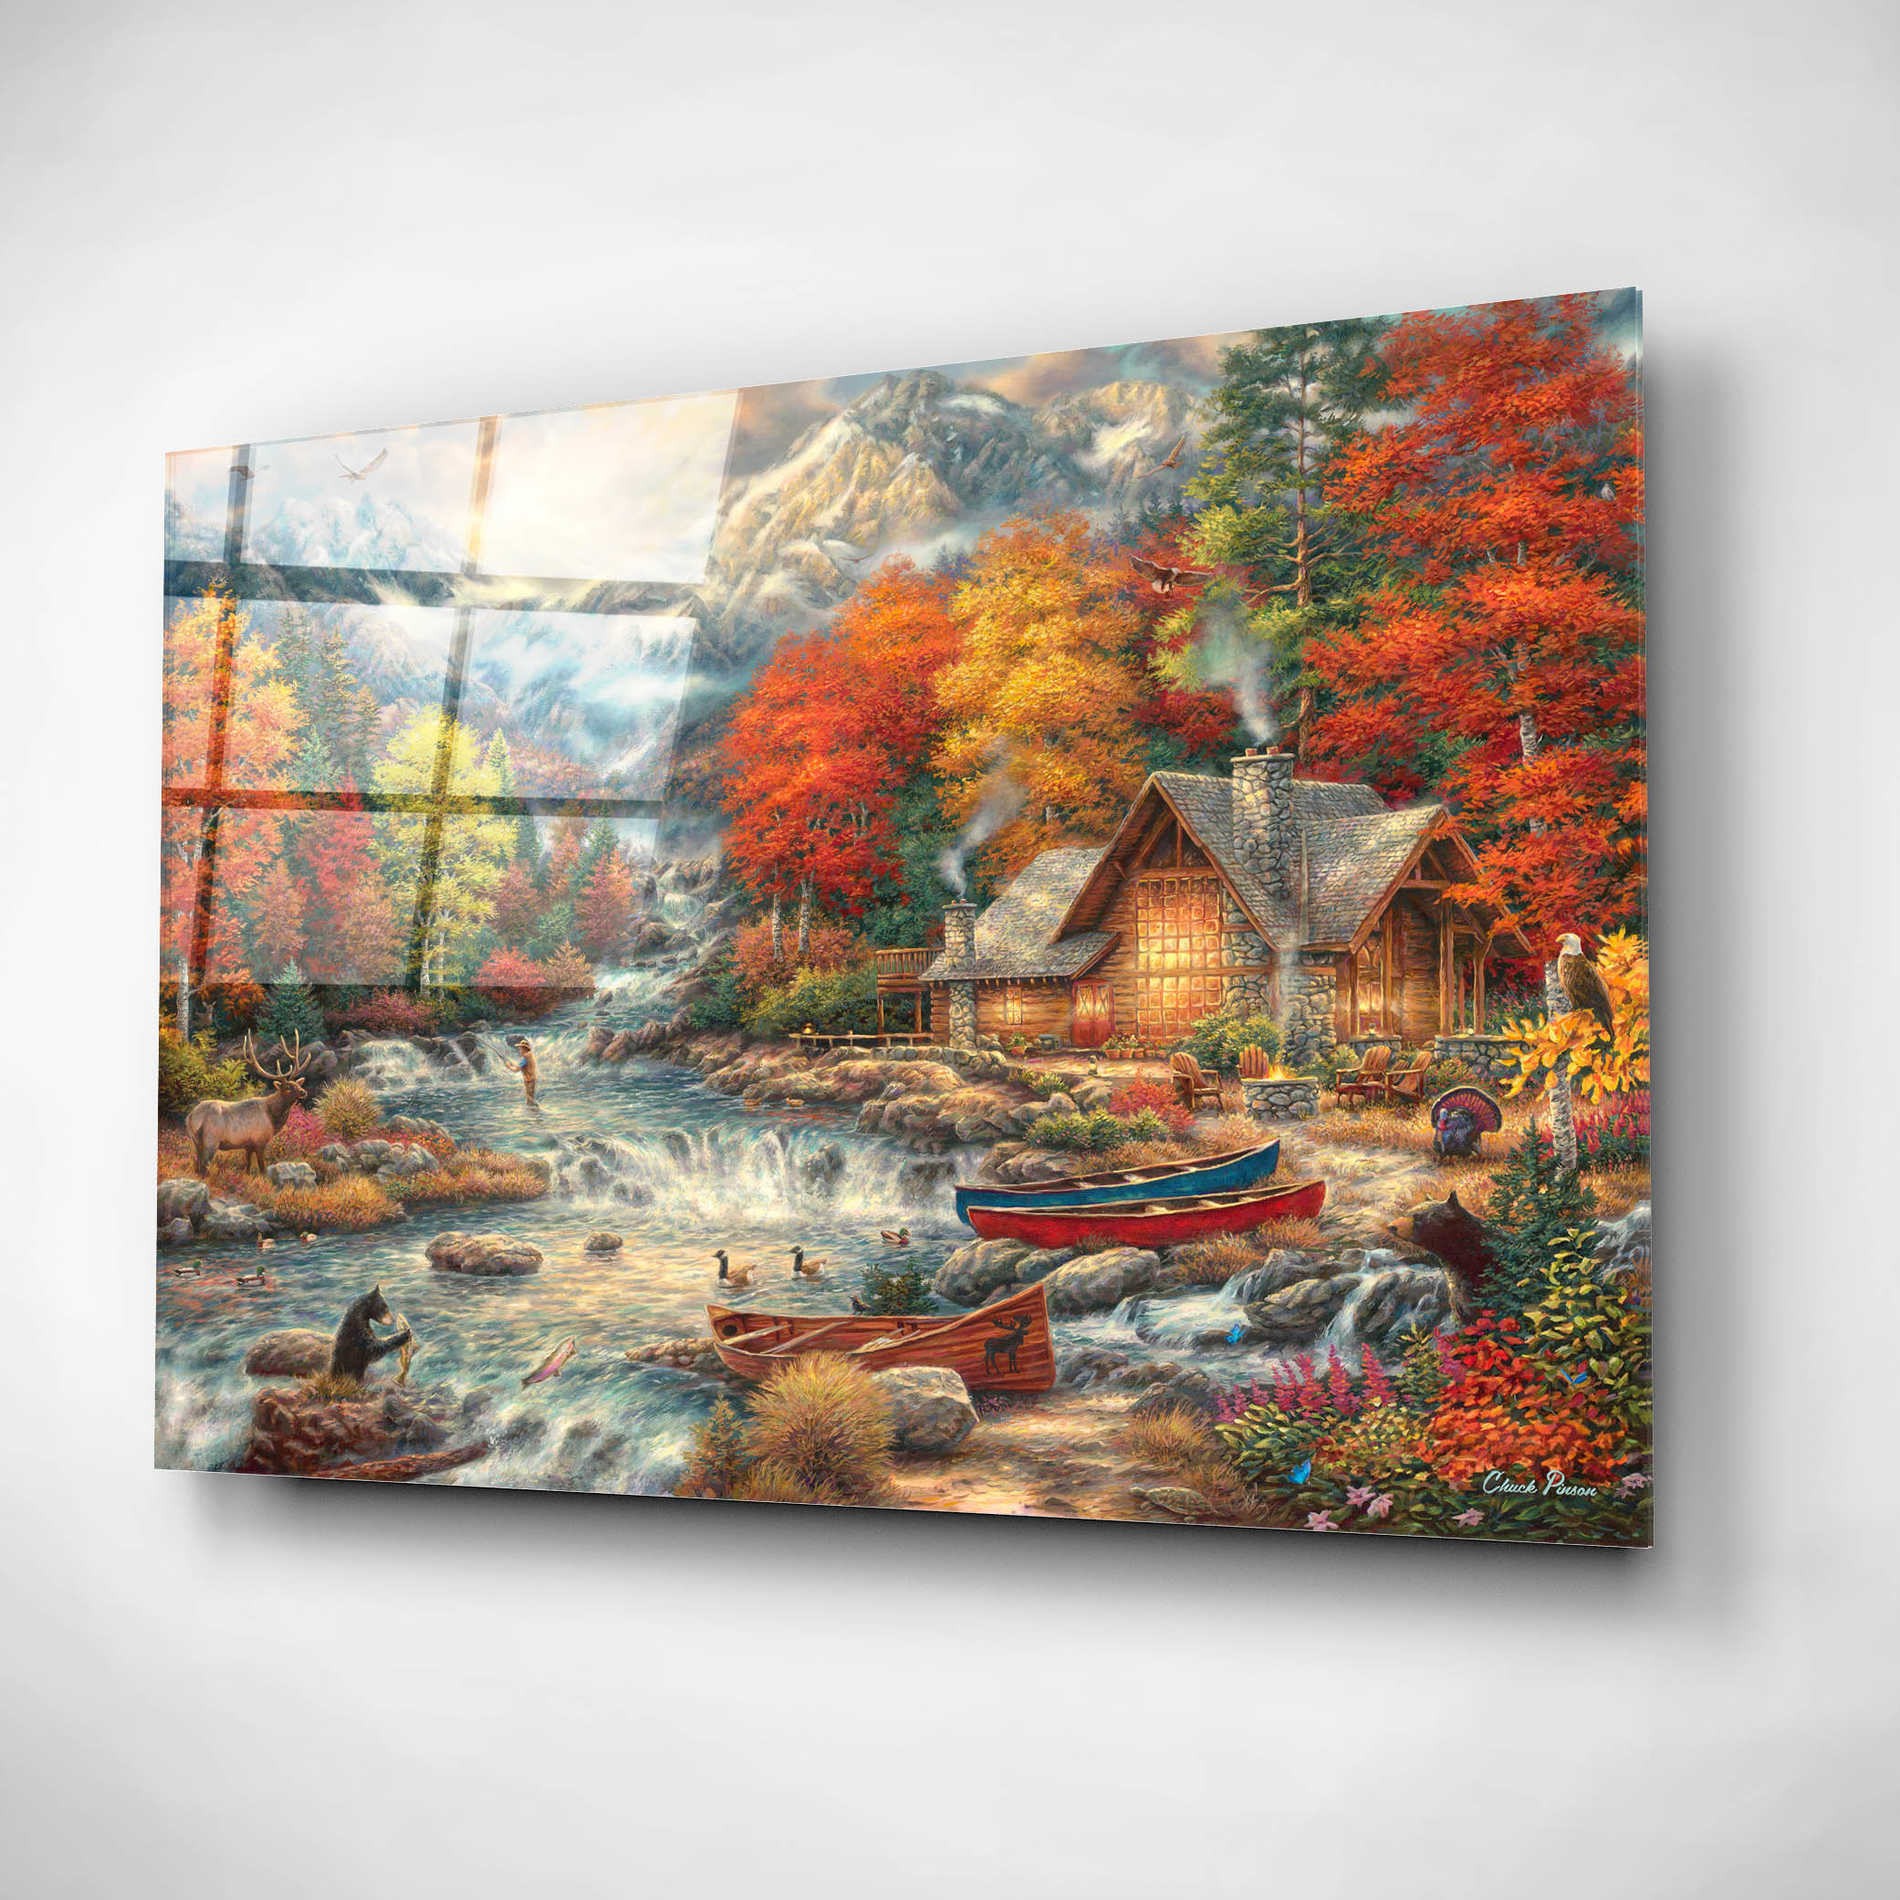 Epic Art 'Treasures of the Great Outdoors' by Chuck Pinson, Acrylic Glass Wall Art,16x12